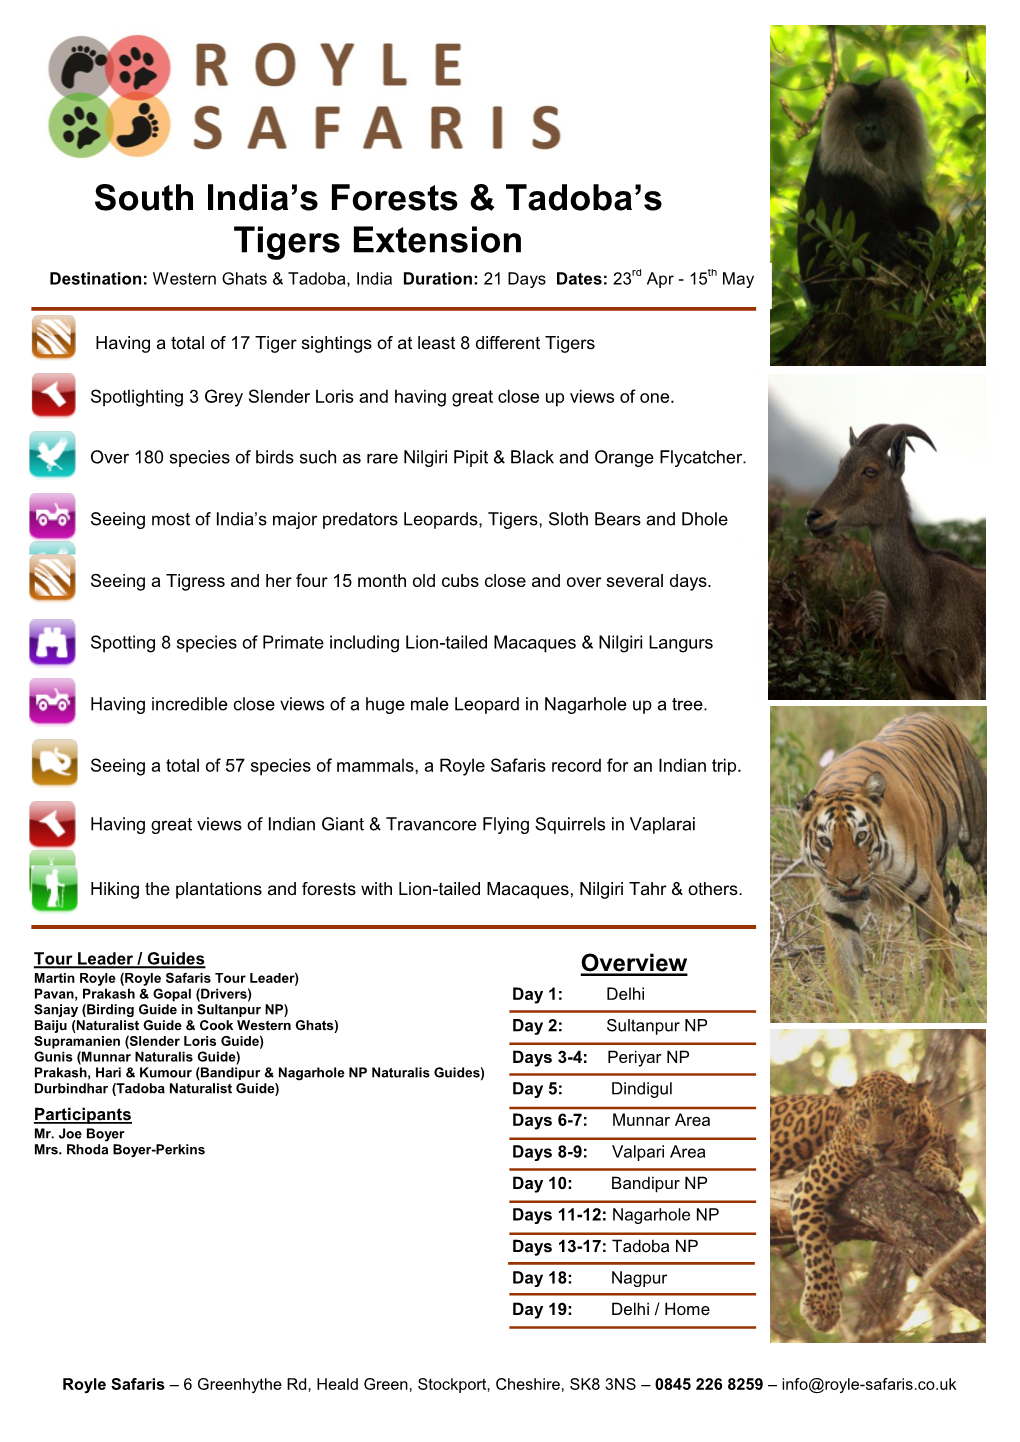 South India's Forests & Tadoba's Tigers Extension